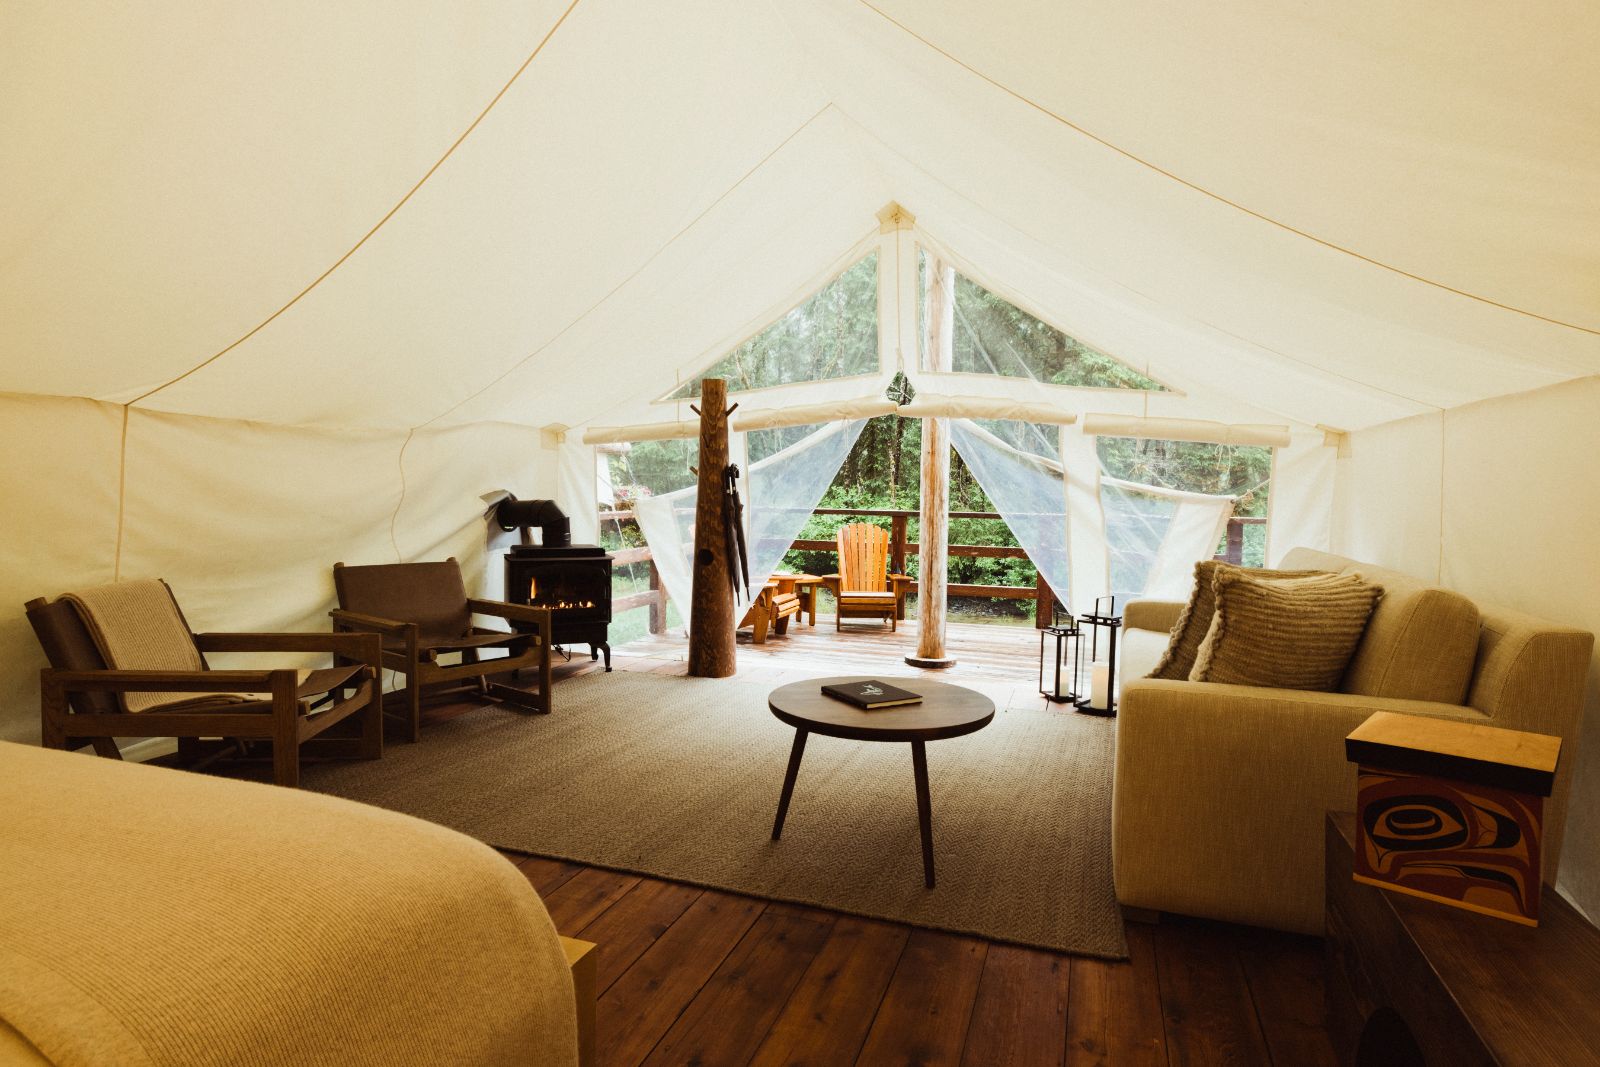 Luxury tent guest suite living area at Clayoquot Wilderness Resort in Vancouver, Canada